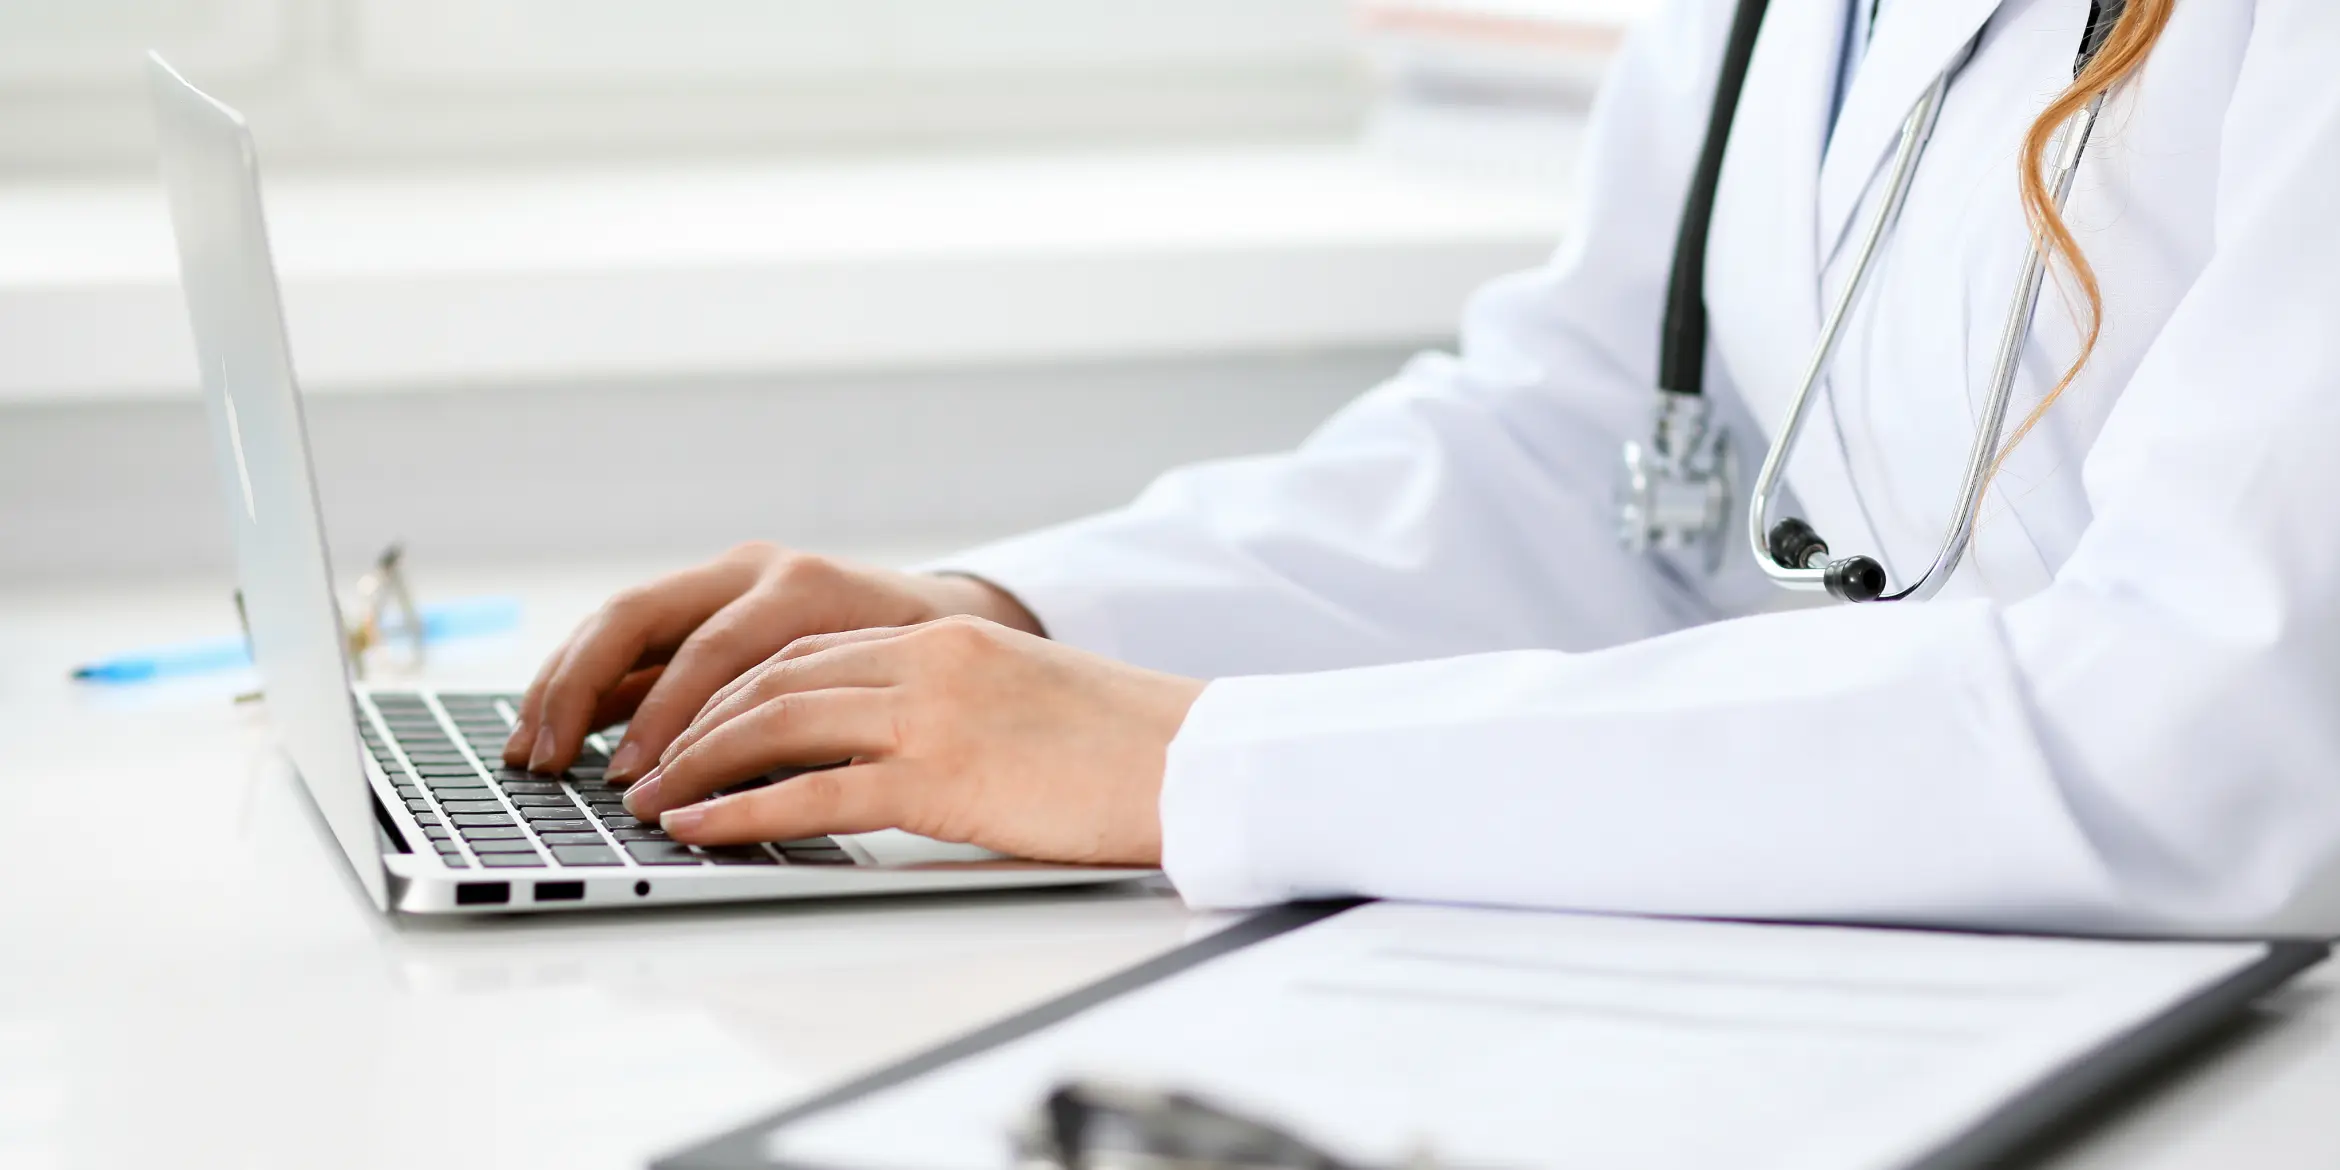 EHR system to support clinical